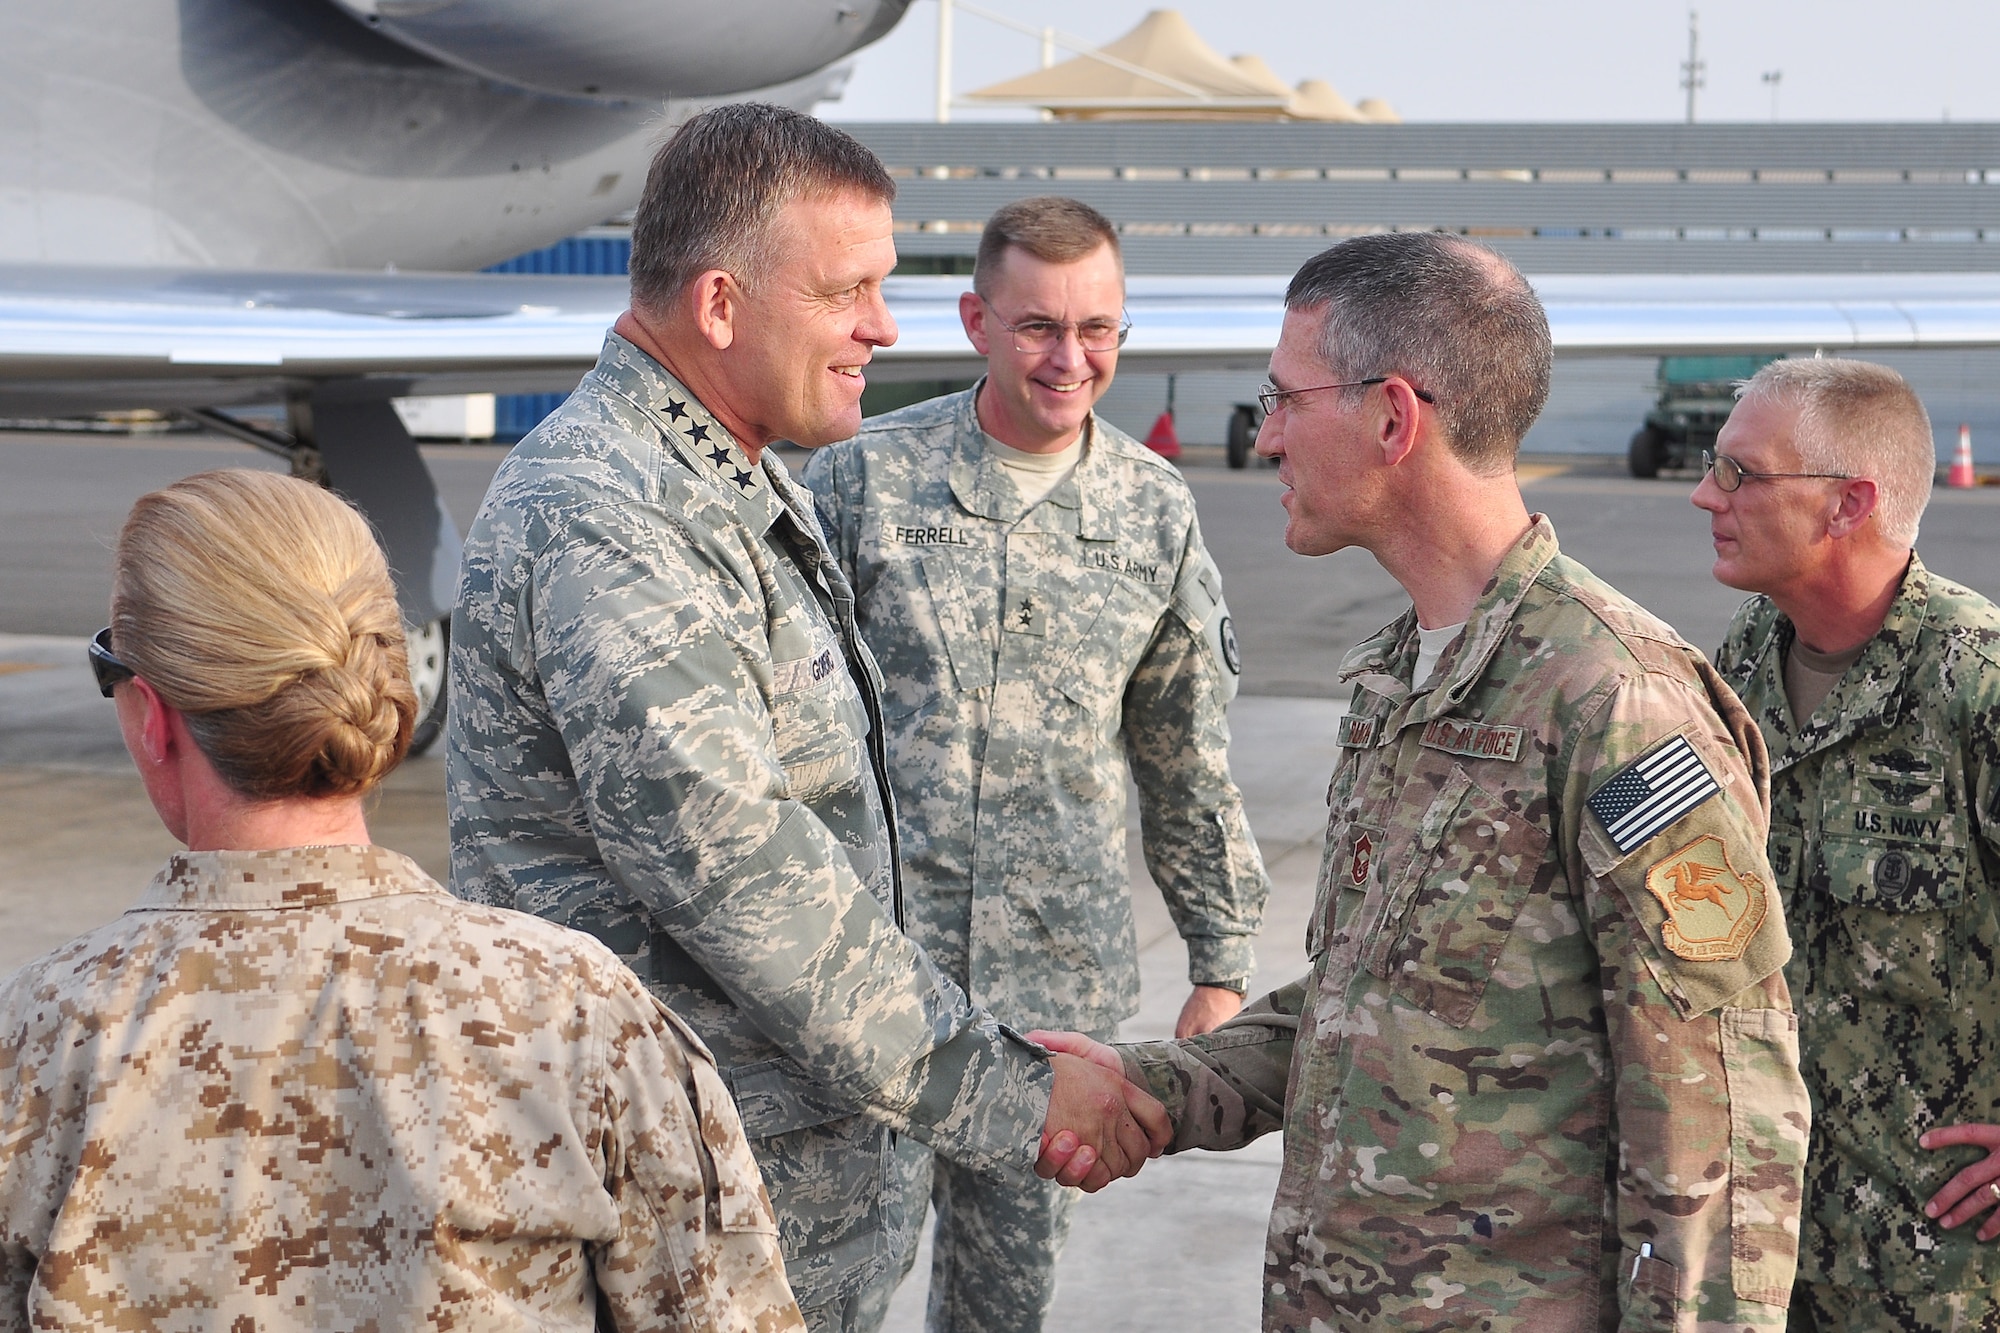 U.S. Air Force Gen. Frank Gorenc, U.S. Air Forces in Europe and Air Forces Africa commander, meets U.S. Air Force Chief Master Sgt. Duane Buchi, 449th Air Expeditionary Group senior enlisted leader, as he gets off a plane at Camp Lemonnier, Djibouti, Aug. 22, 2013. This was Gorenc ‘s first trip to Africa since taking command of USAFE/AFAFRICA and he used the trip to familiarize himself with Combined Joint Task Force-Horn of Africa’s mission of stabilizing and strengthening security in East Africa through military-to-military engagements with partner nations. (U.S. Air Force photo by Tech. Sgt. Chad Thompson)